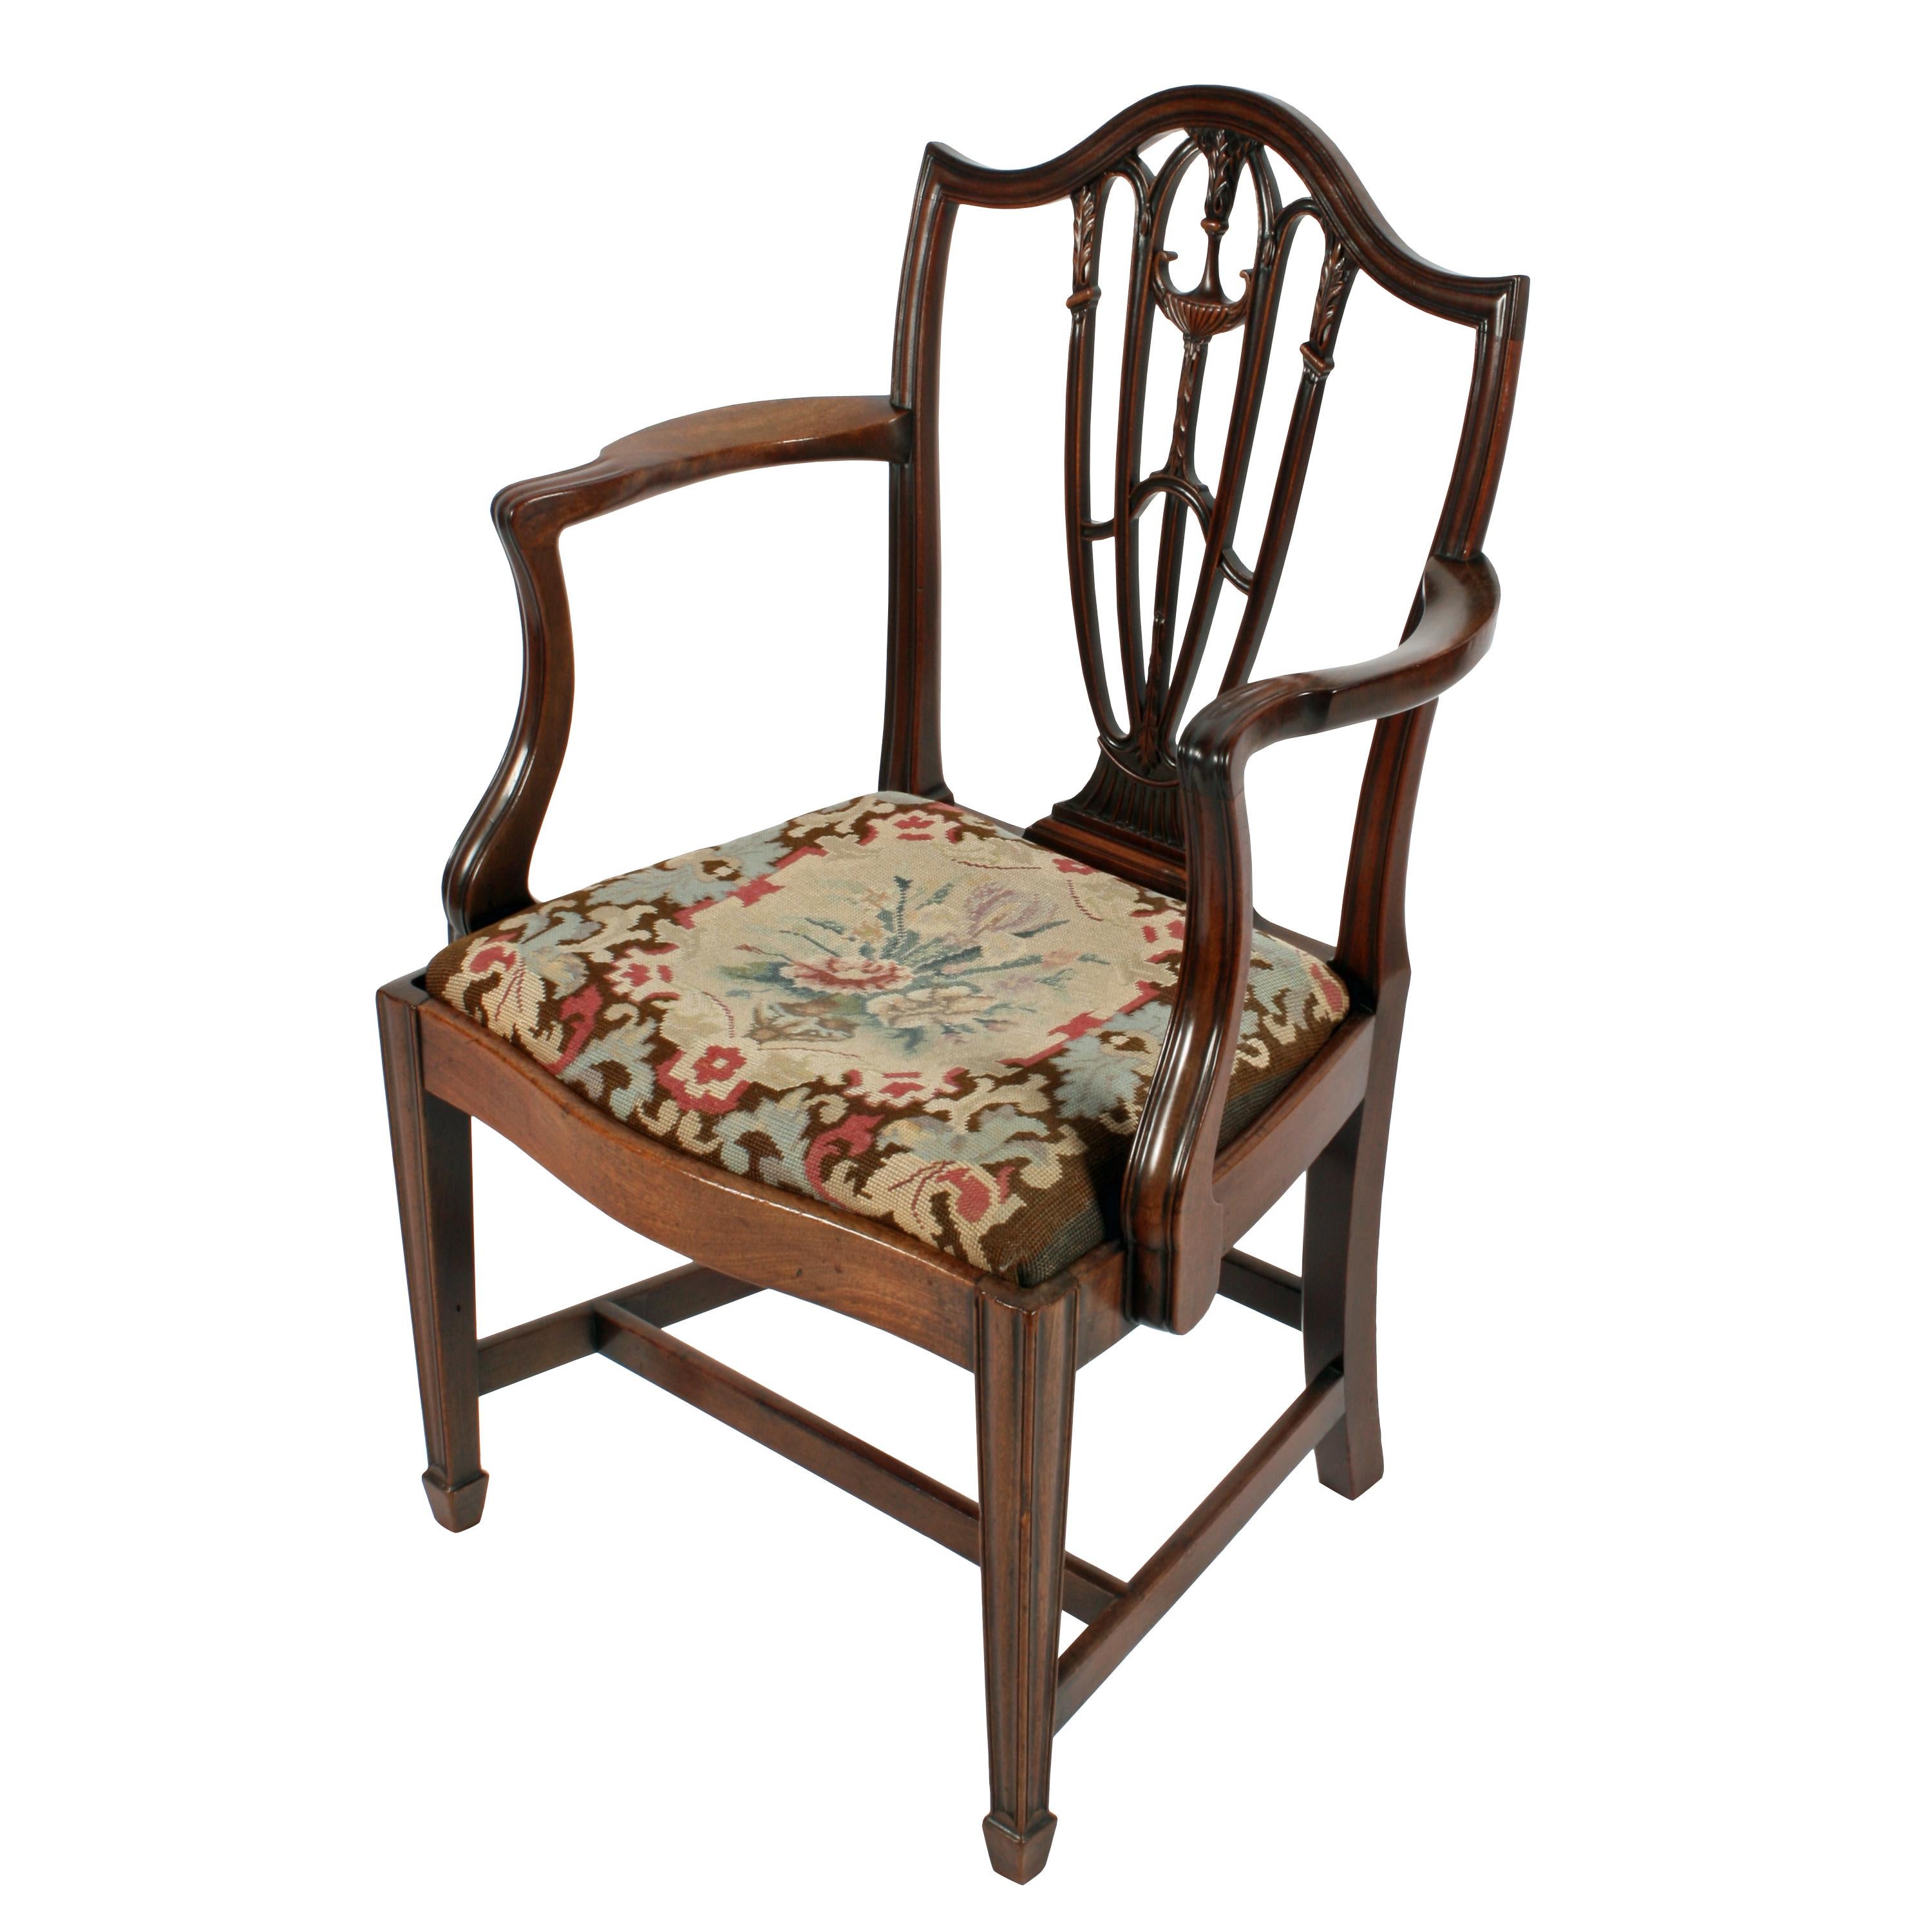 A late 18th century Georgian Hepplewhite mahogany elbow chair.

The chair has a domed top rail with a pierced and carved centre splat that is decorated with carved acanthus leaves and an urn.

The shaped arms have a swept support with a reeded